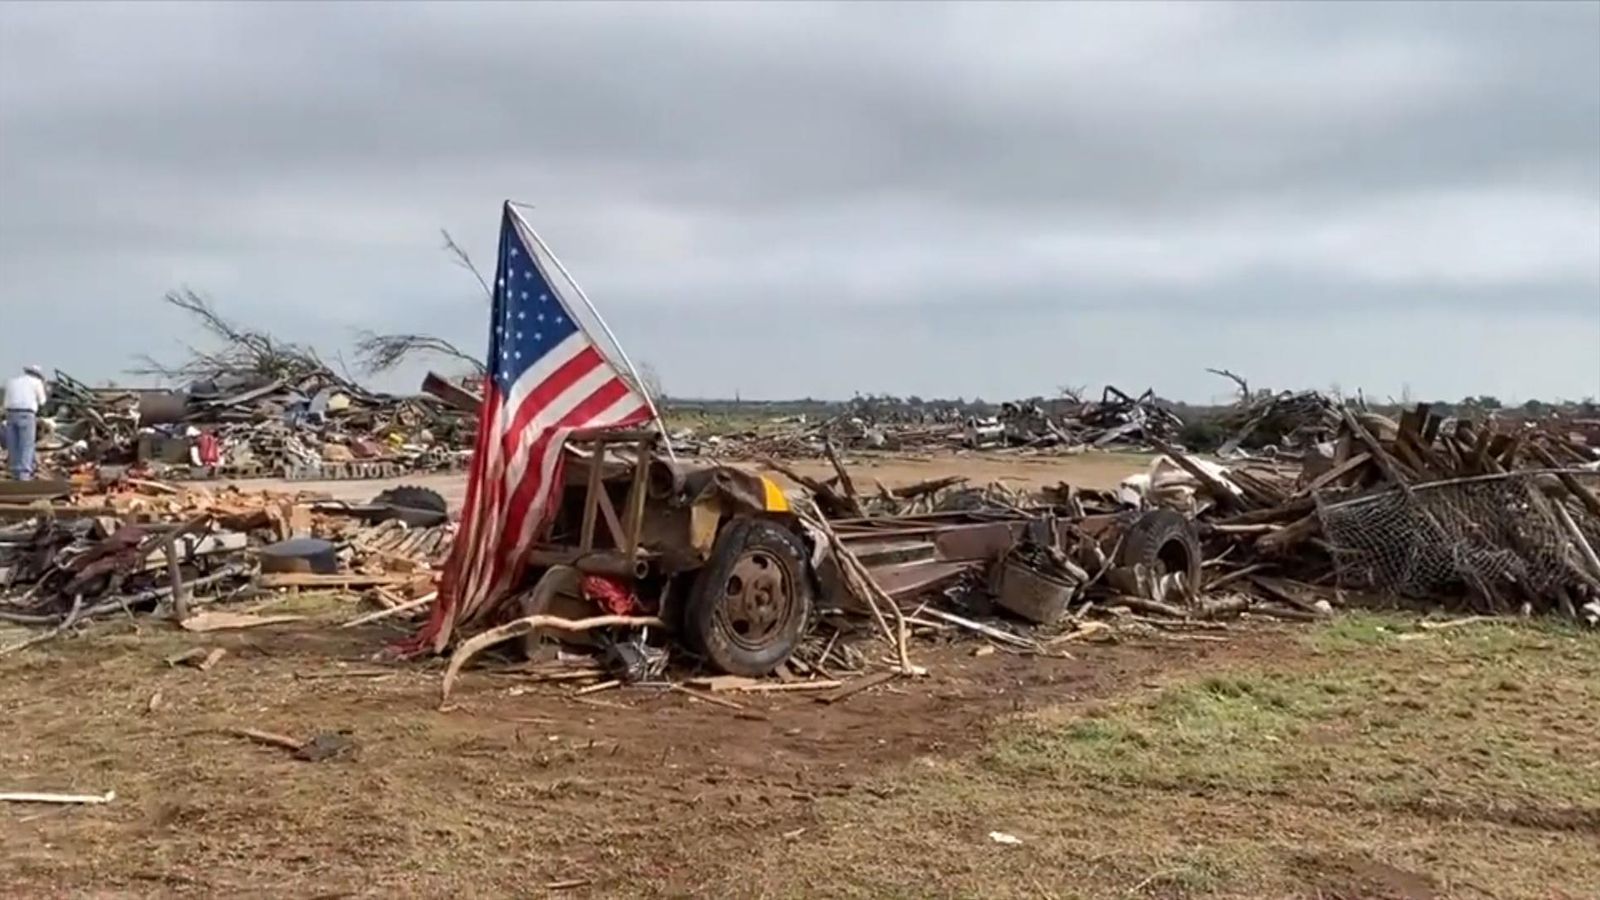 Texas Deadly tornado strikes small town killing four and injuring multiple others US News